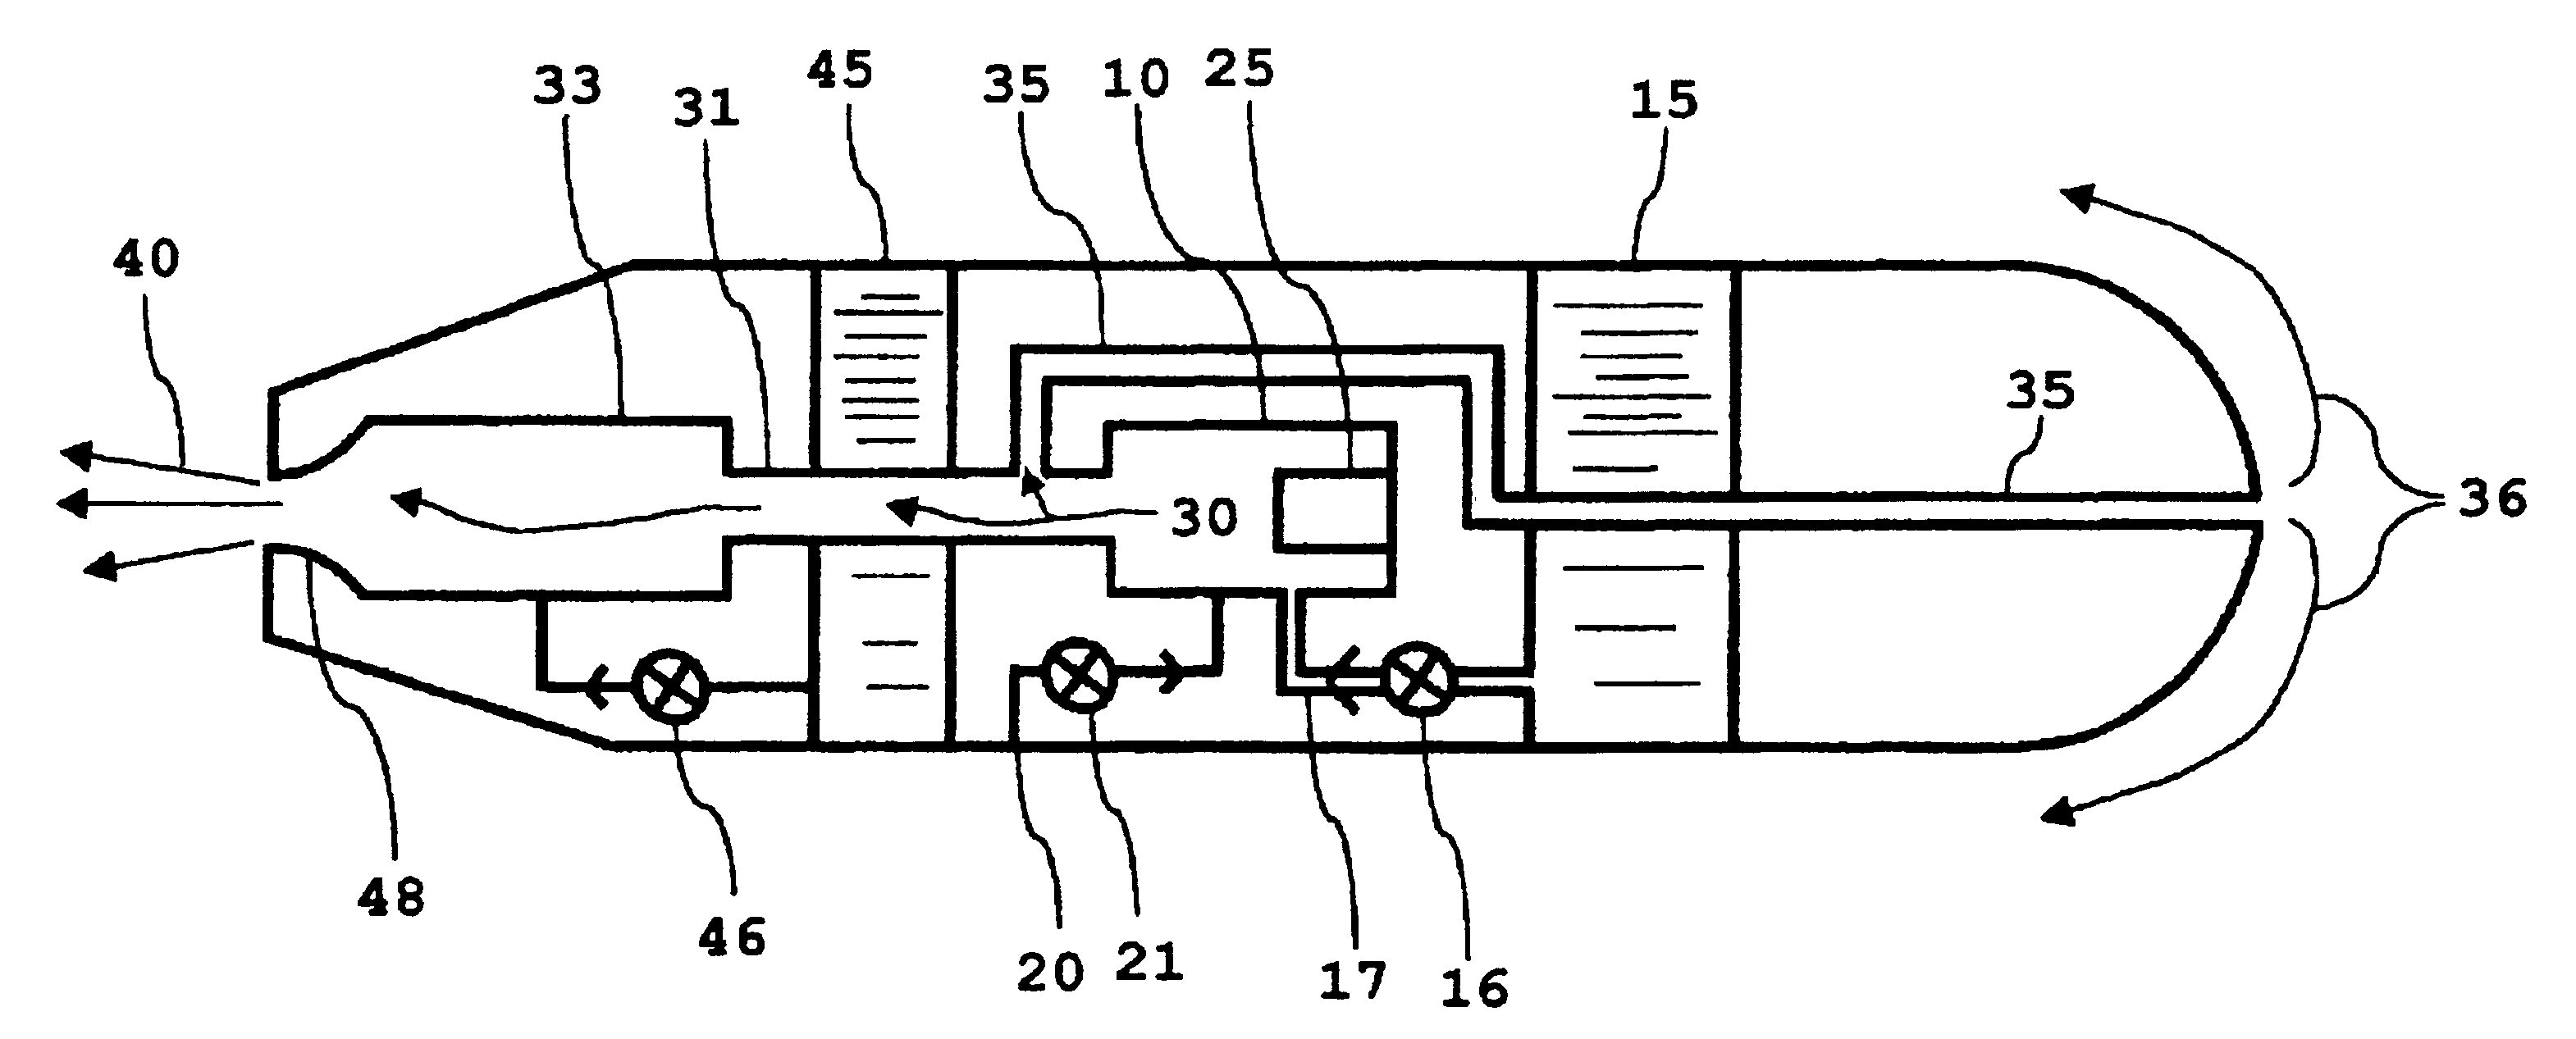 Gas generating process for propulsion and hydrogen production